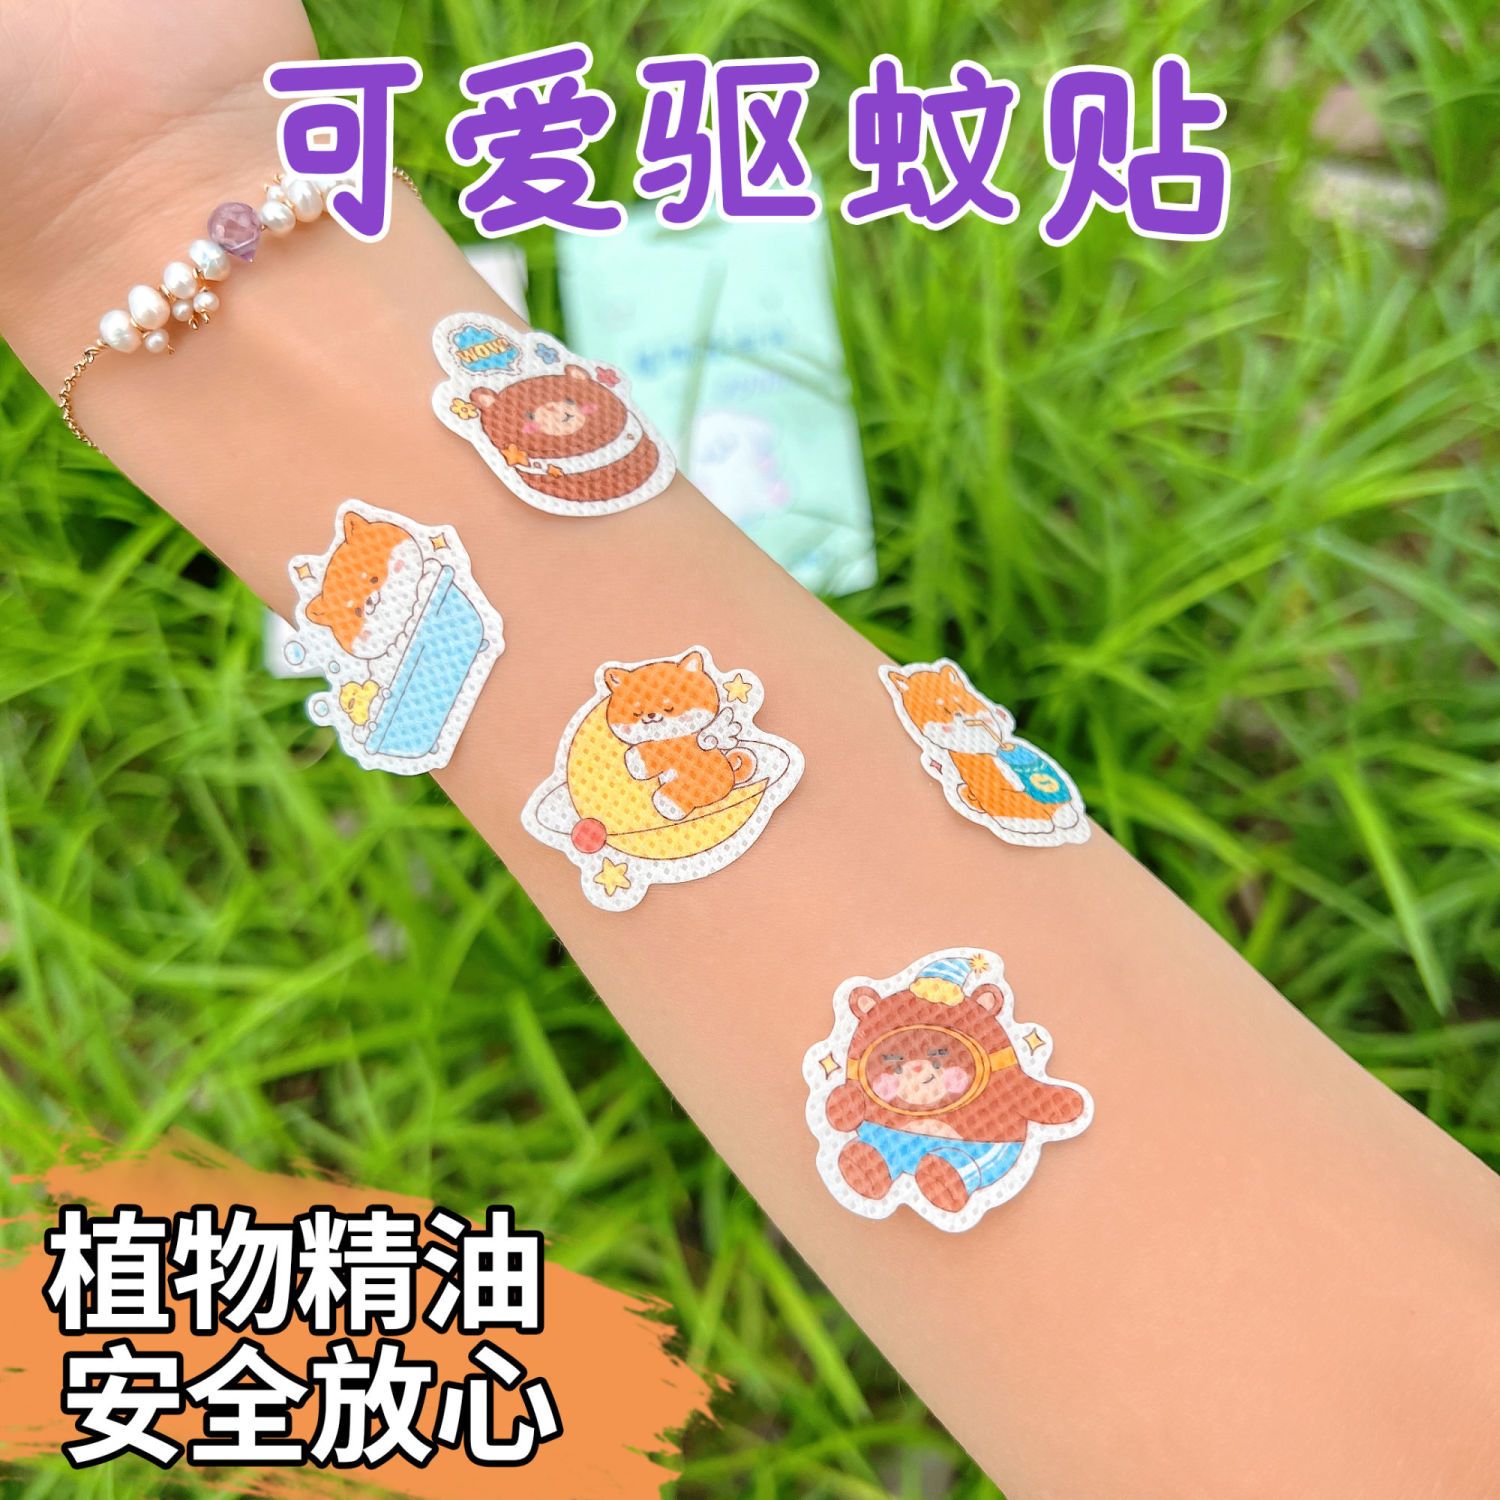 Mosquito repellent sticker cute mosquito repellent sticker cartoon ins student infant adult mosquito repellent artifact high face value carry on Sticker